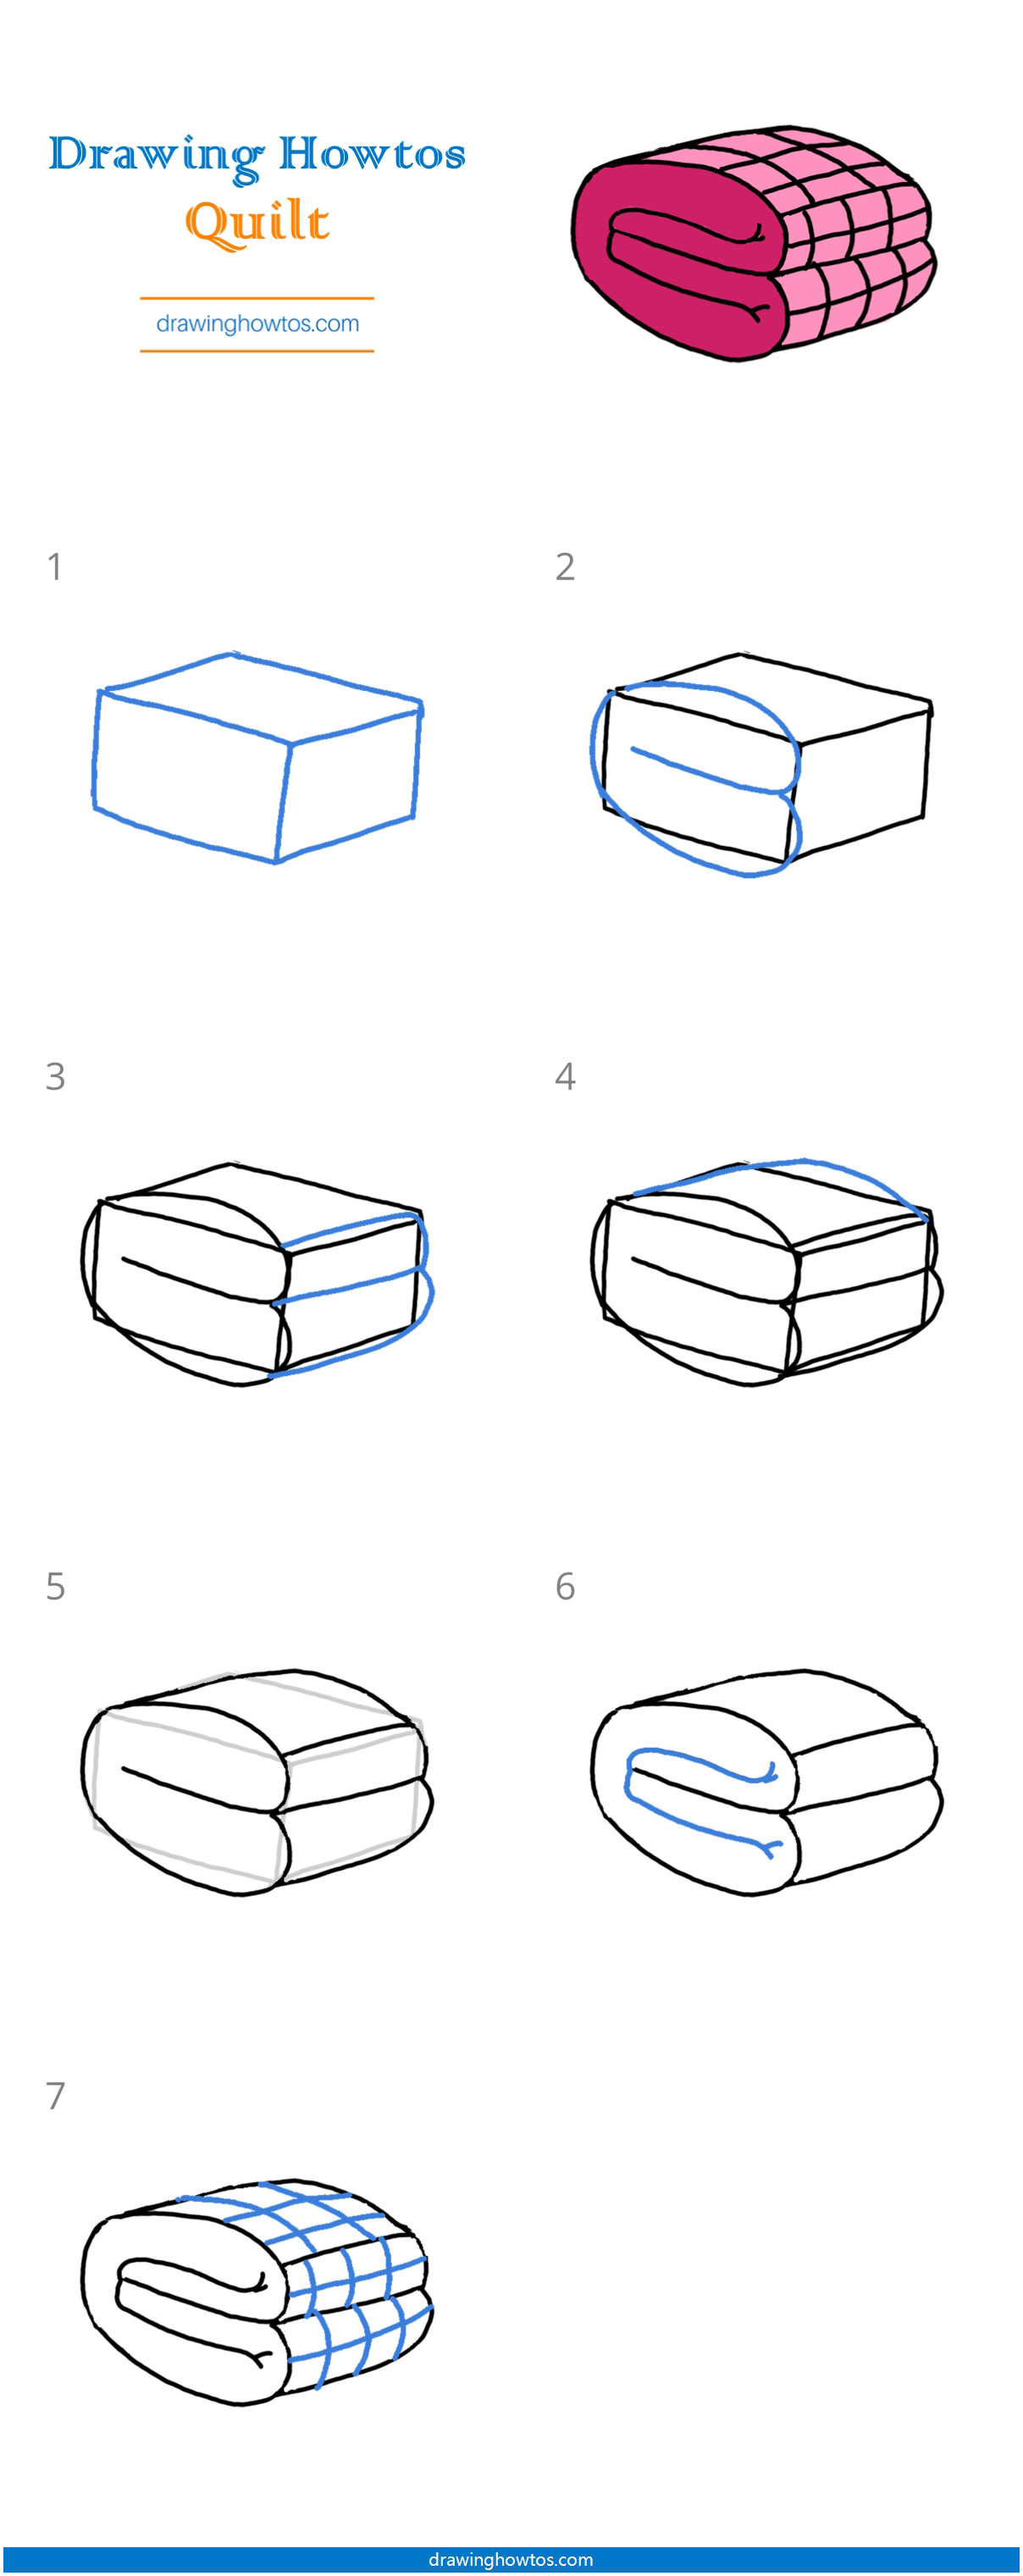 How to Draw a Quilt Step by Step